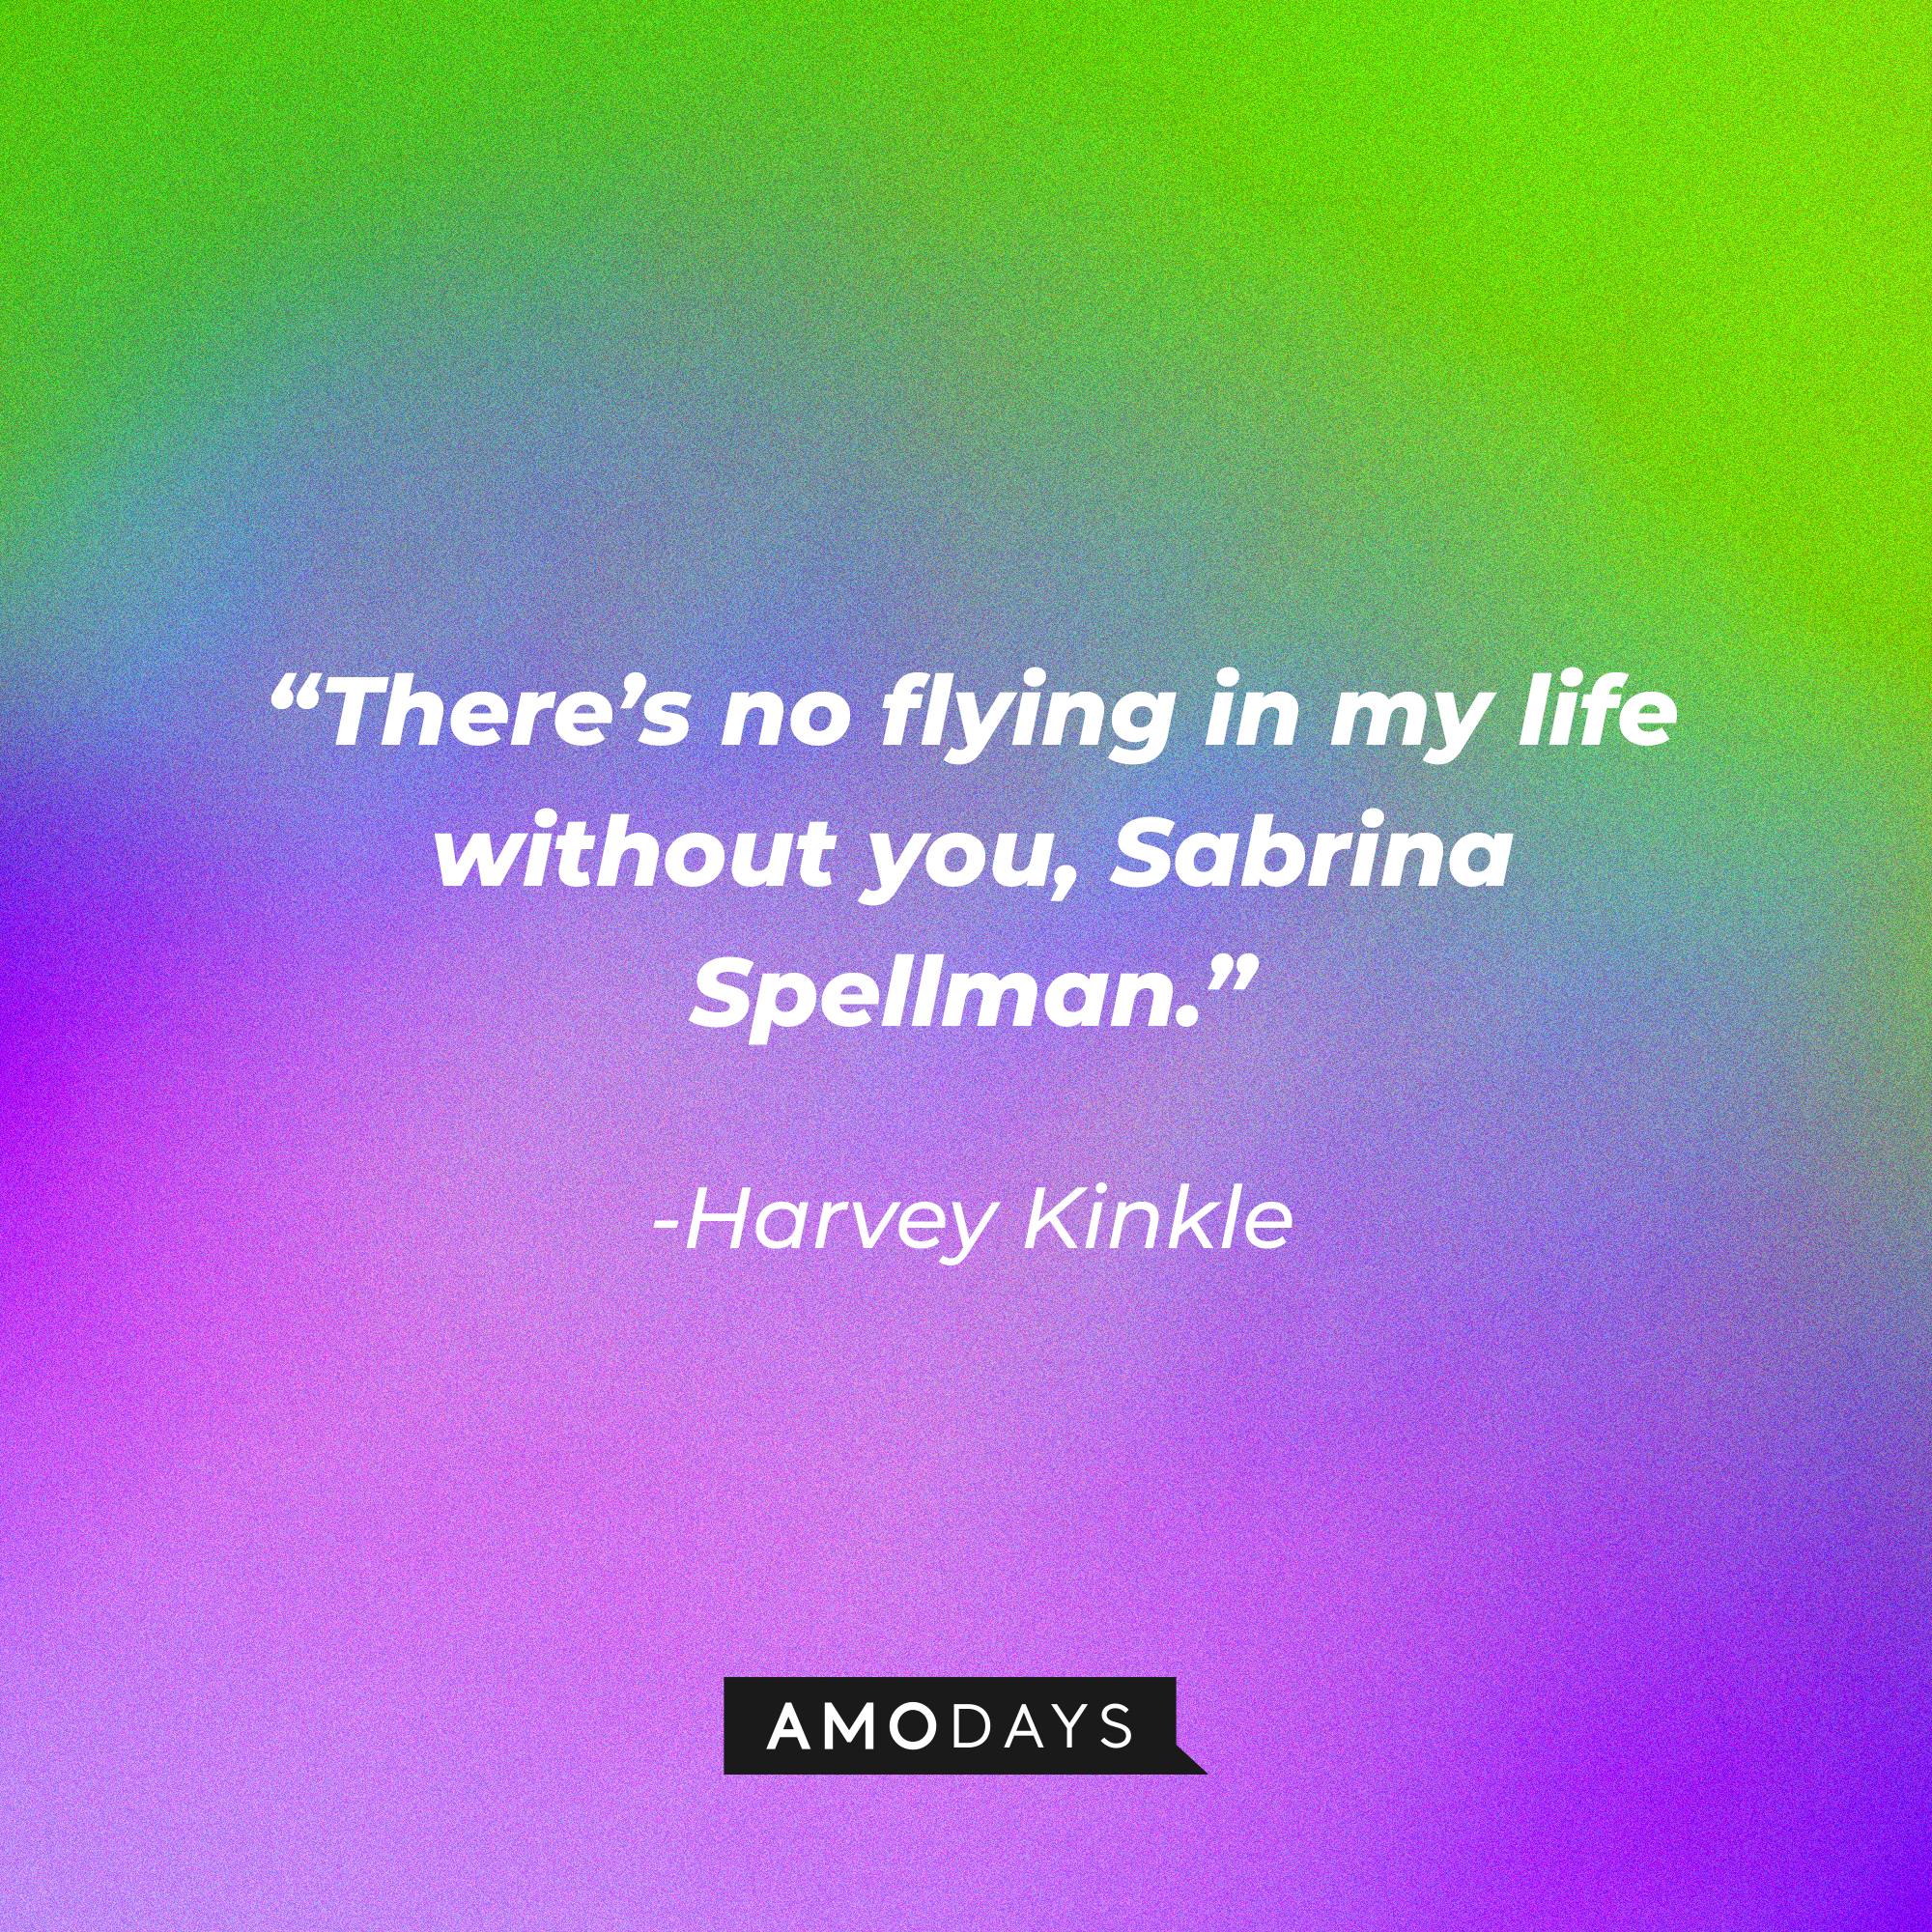 Harvey Kinkle's quote: “There’s no flying in my life without you, Sabrina Spellman.” | Source: Amodays